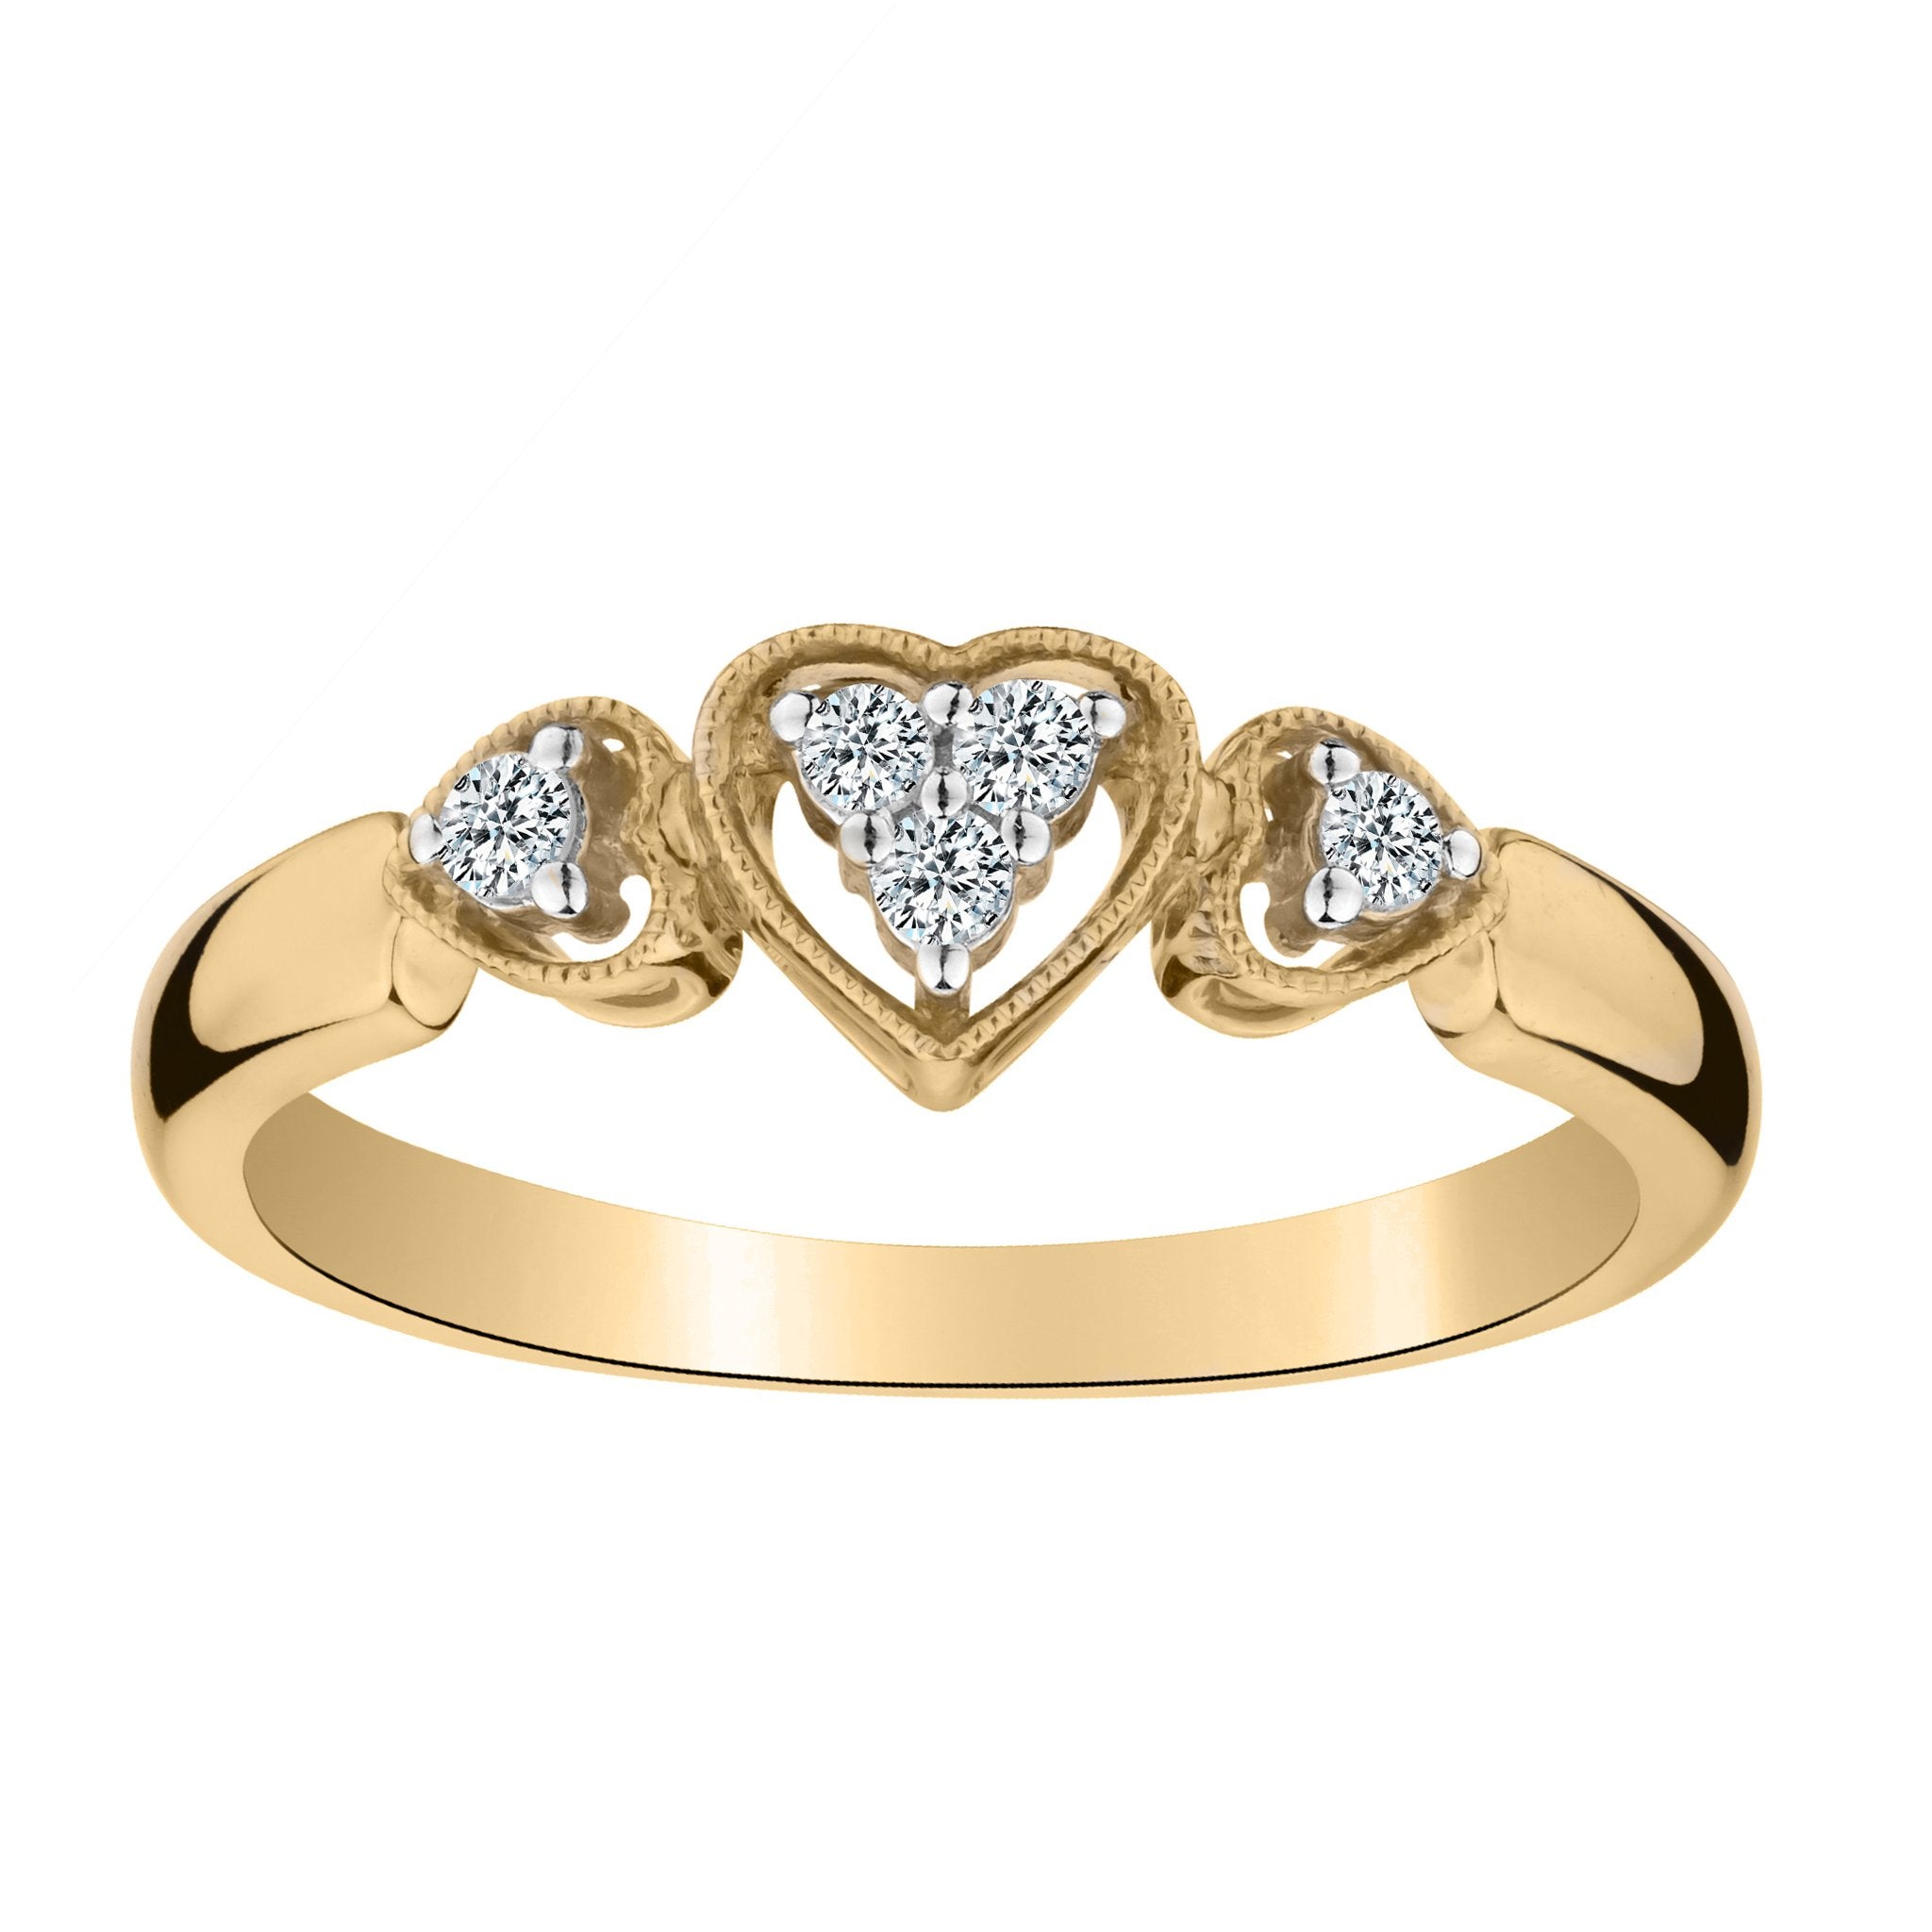 .10 CARAT "PAST, PRESENT, FUTURE" DIAMOND HEART RING, 10kt YELLOW GOLD. Fashion Rings - Griffin Jewellery Designs